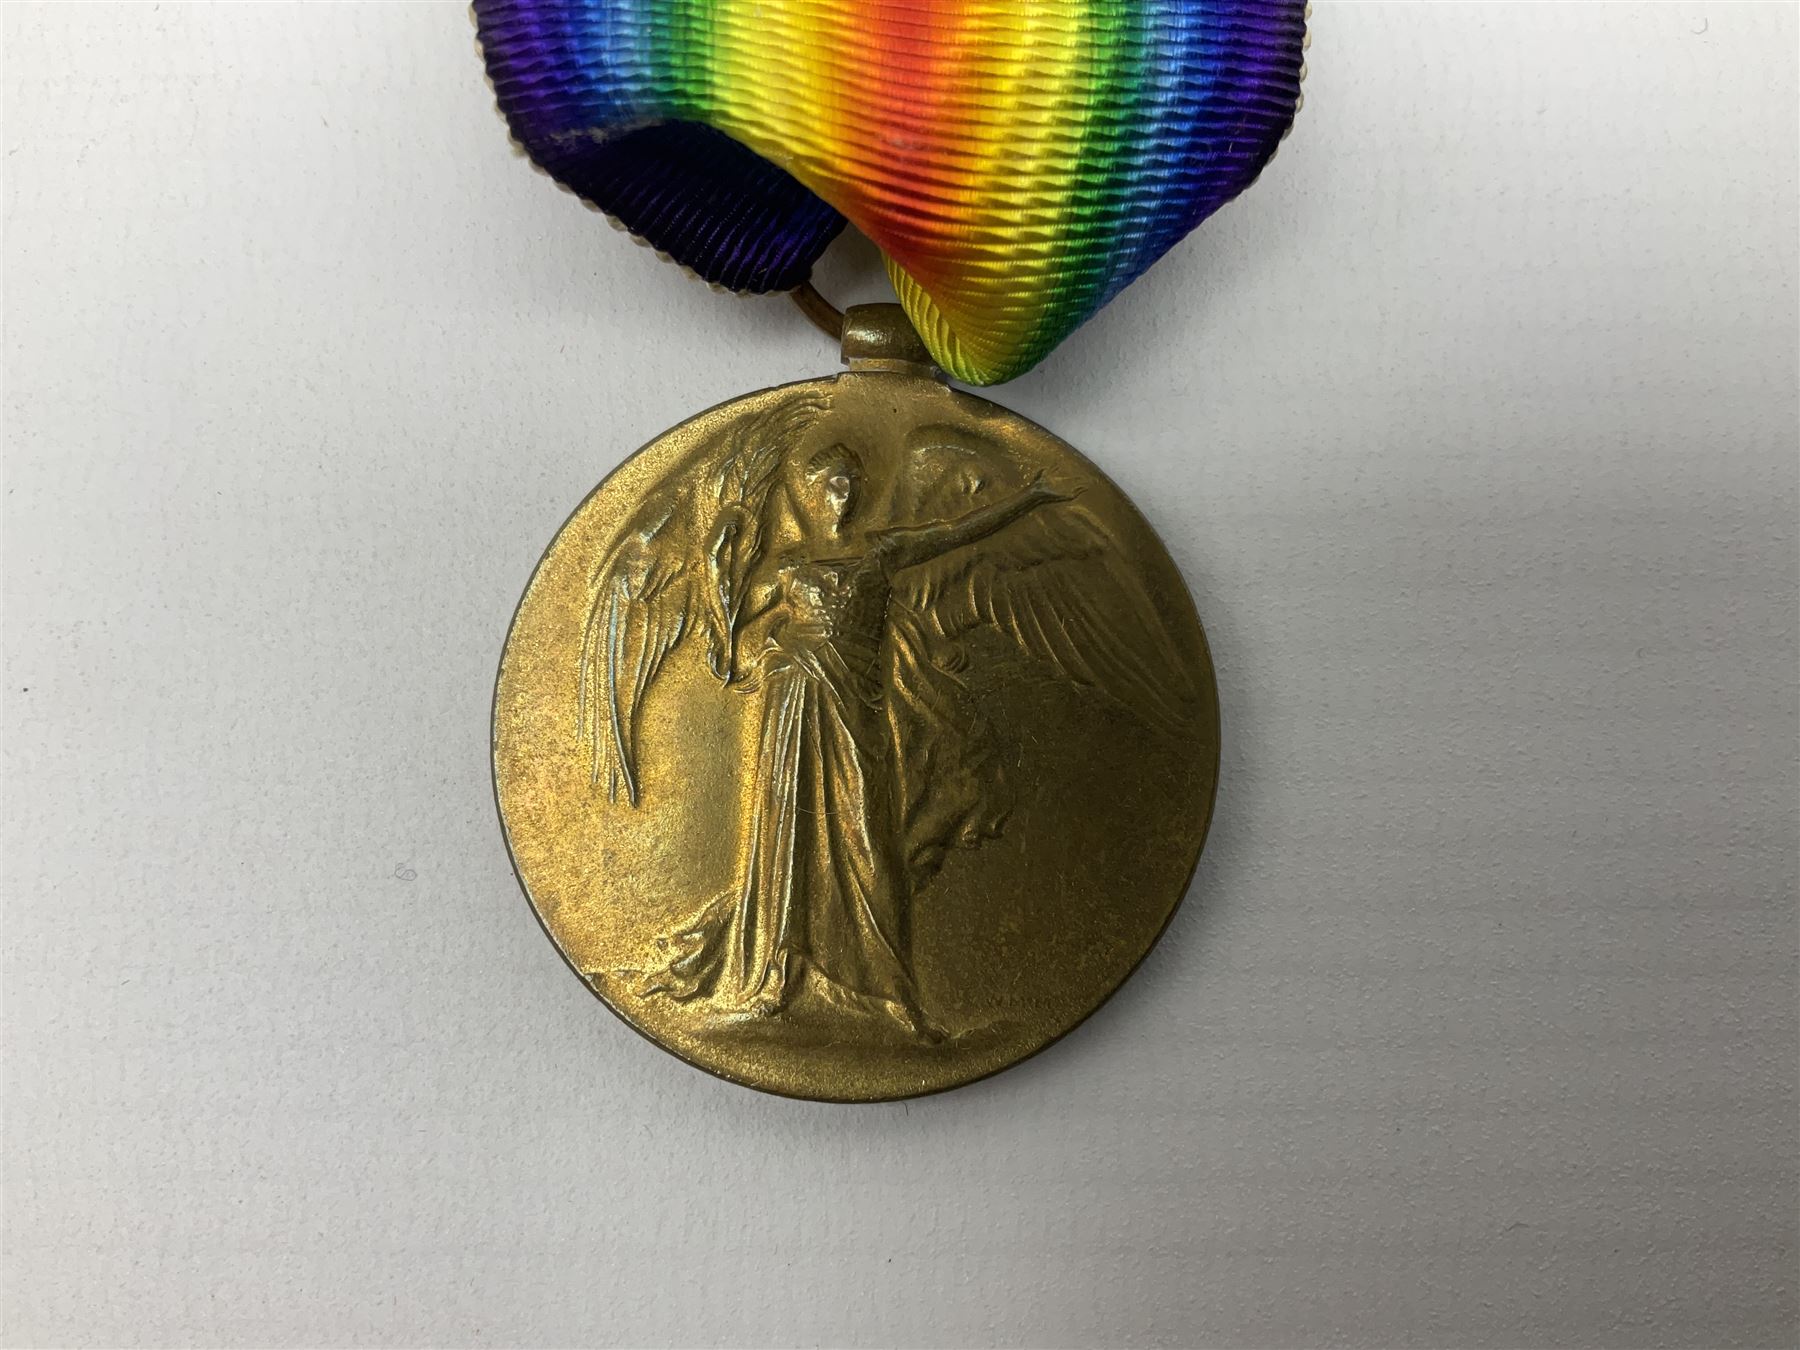 WW1 pair of medals comprising British War Medal and Victory Medal awarded to 3389 Pte. J. Humphrey D - Image 6 of 17